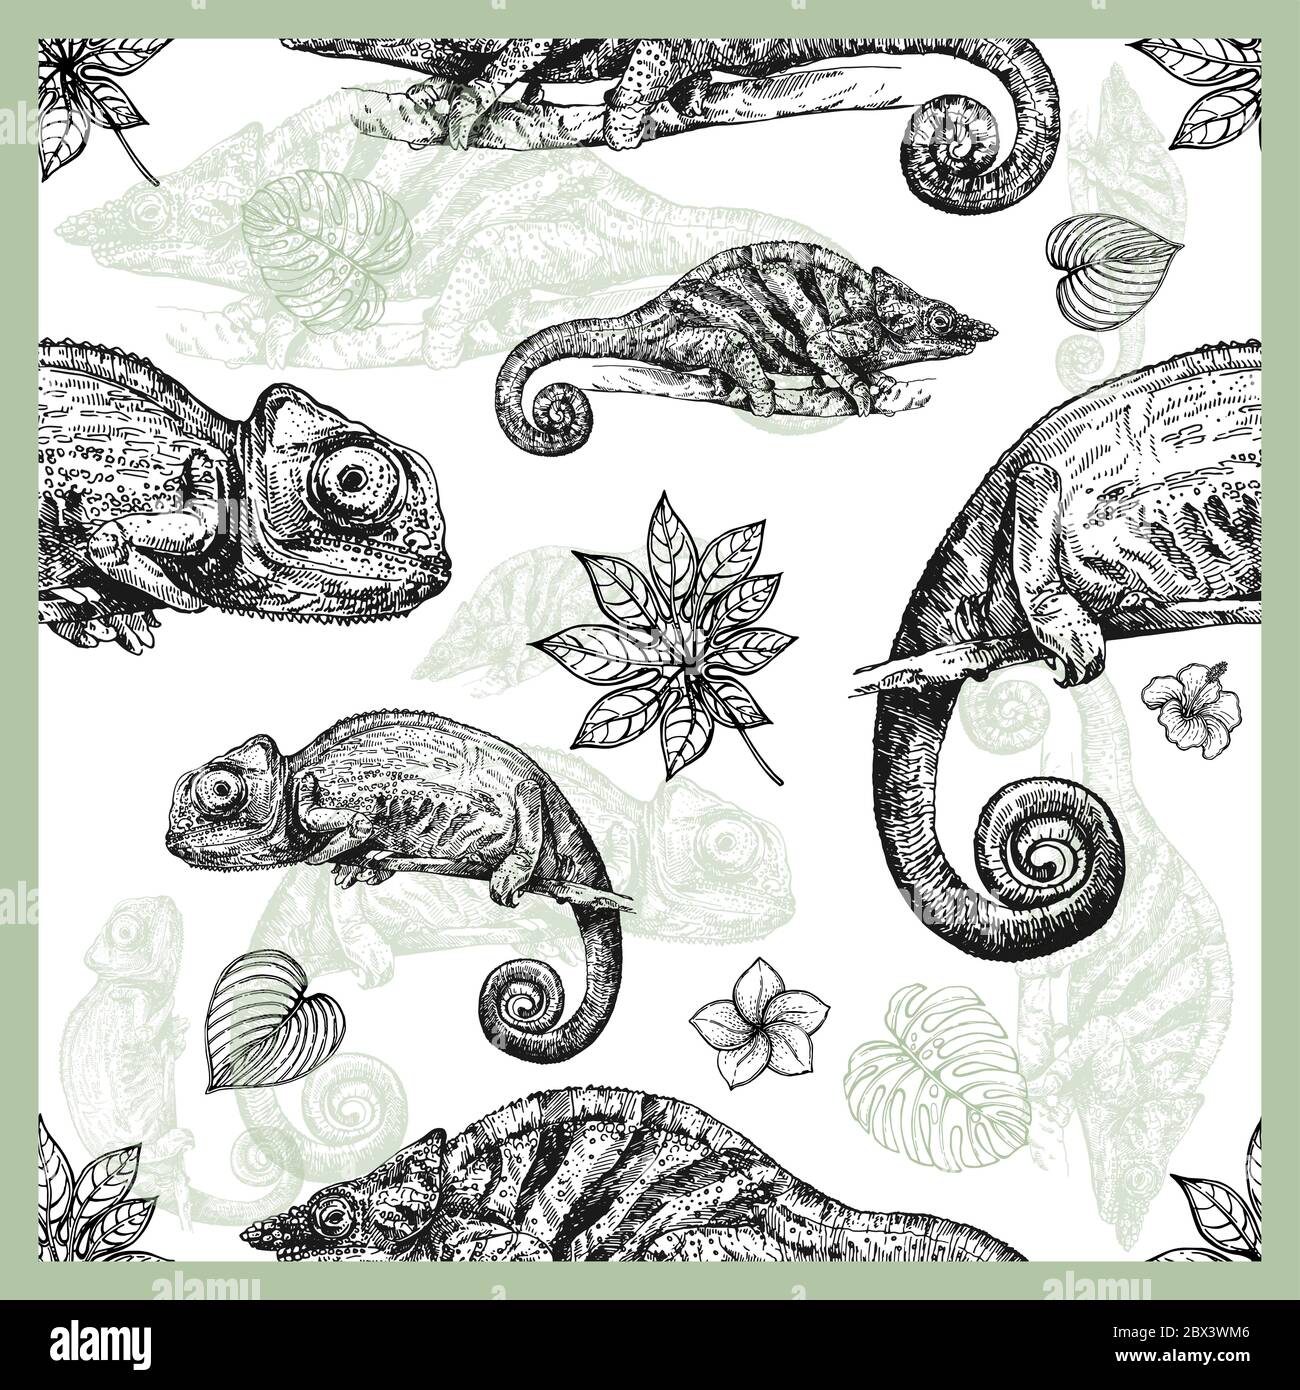 Seamless pattern of hand drawn sketch style chameleons and plants isolated on white background. Vector illustration. Stock Vector